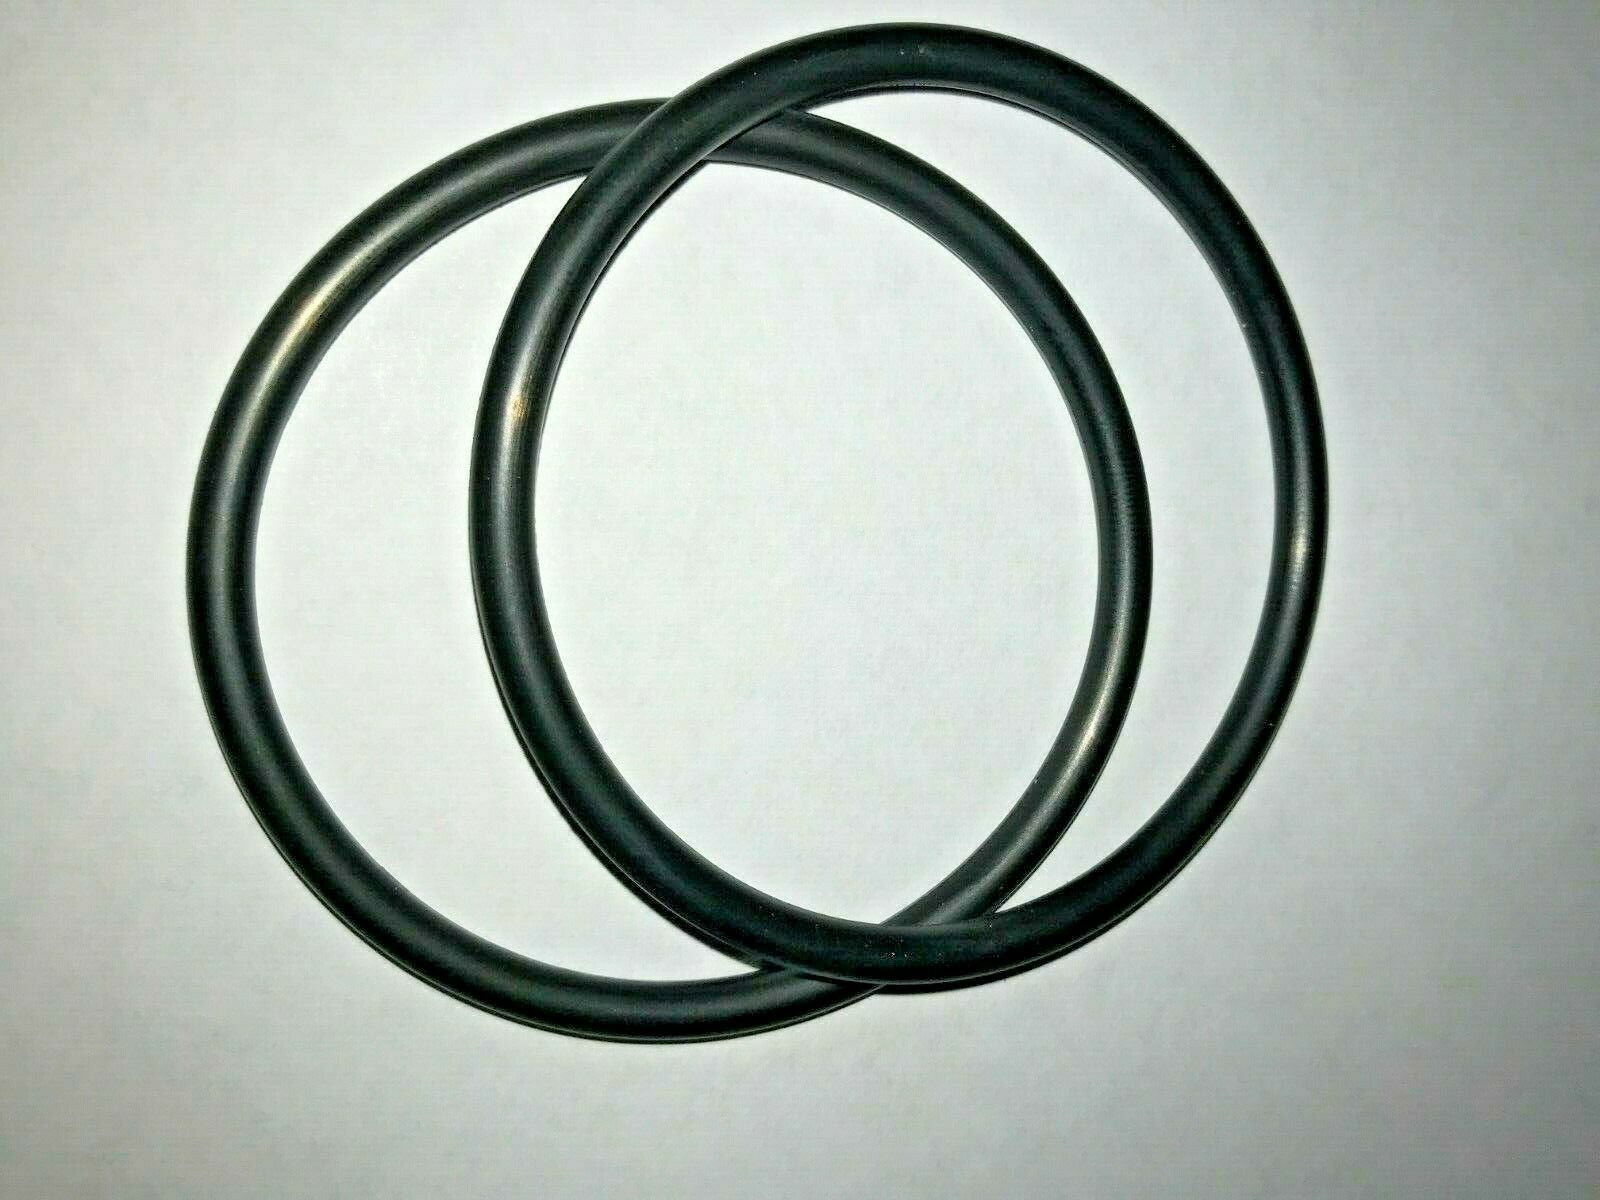 New Replacement Belts for EIKI nt NT-O Series 16mm Sound Film Projector